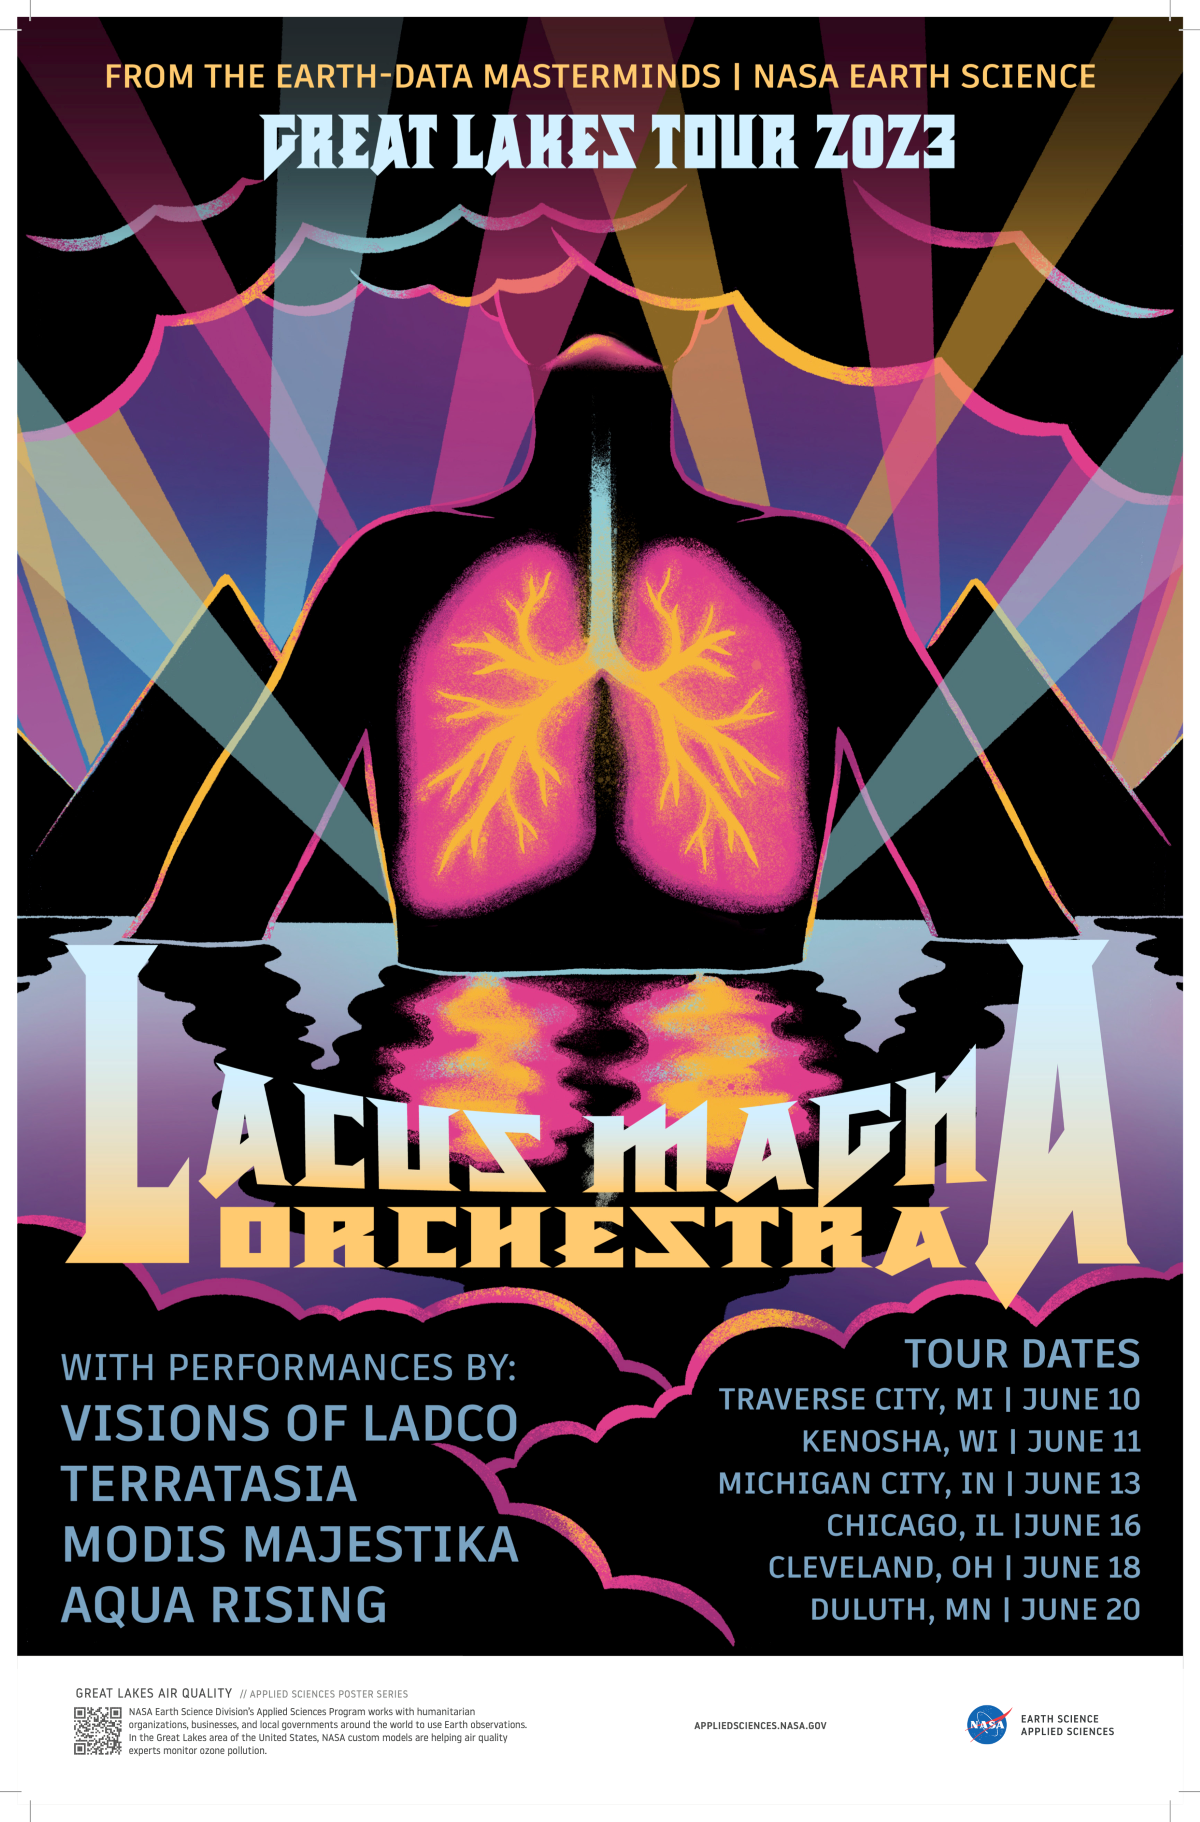 Colorful illustration of a body reflected as it rises out of a lake, with colorful lungs and rays of light radiating out to the clouds. Text reads Lacus Magna Orchestra, Great Lakes Tour 2023.